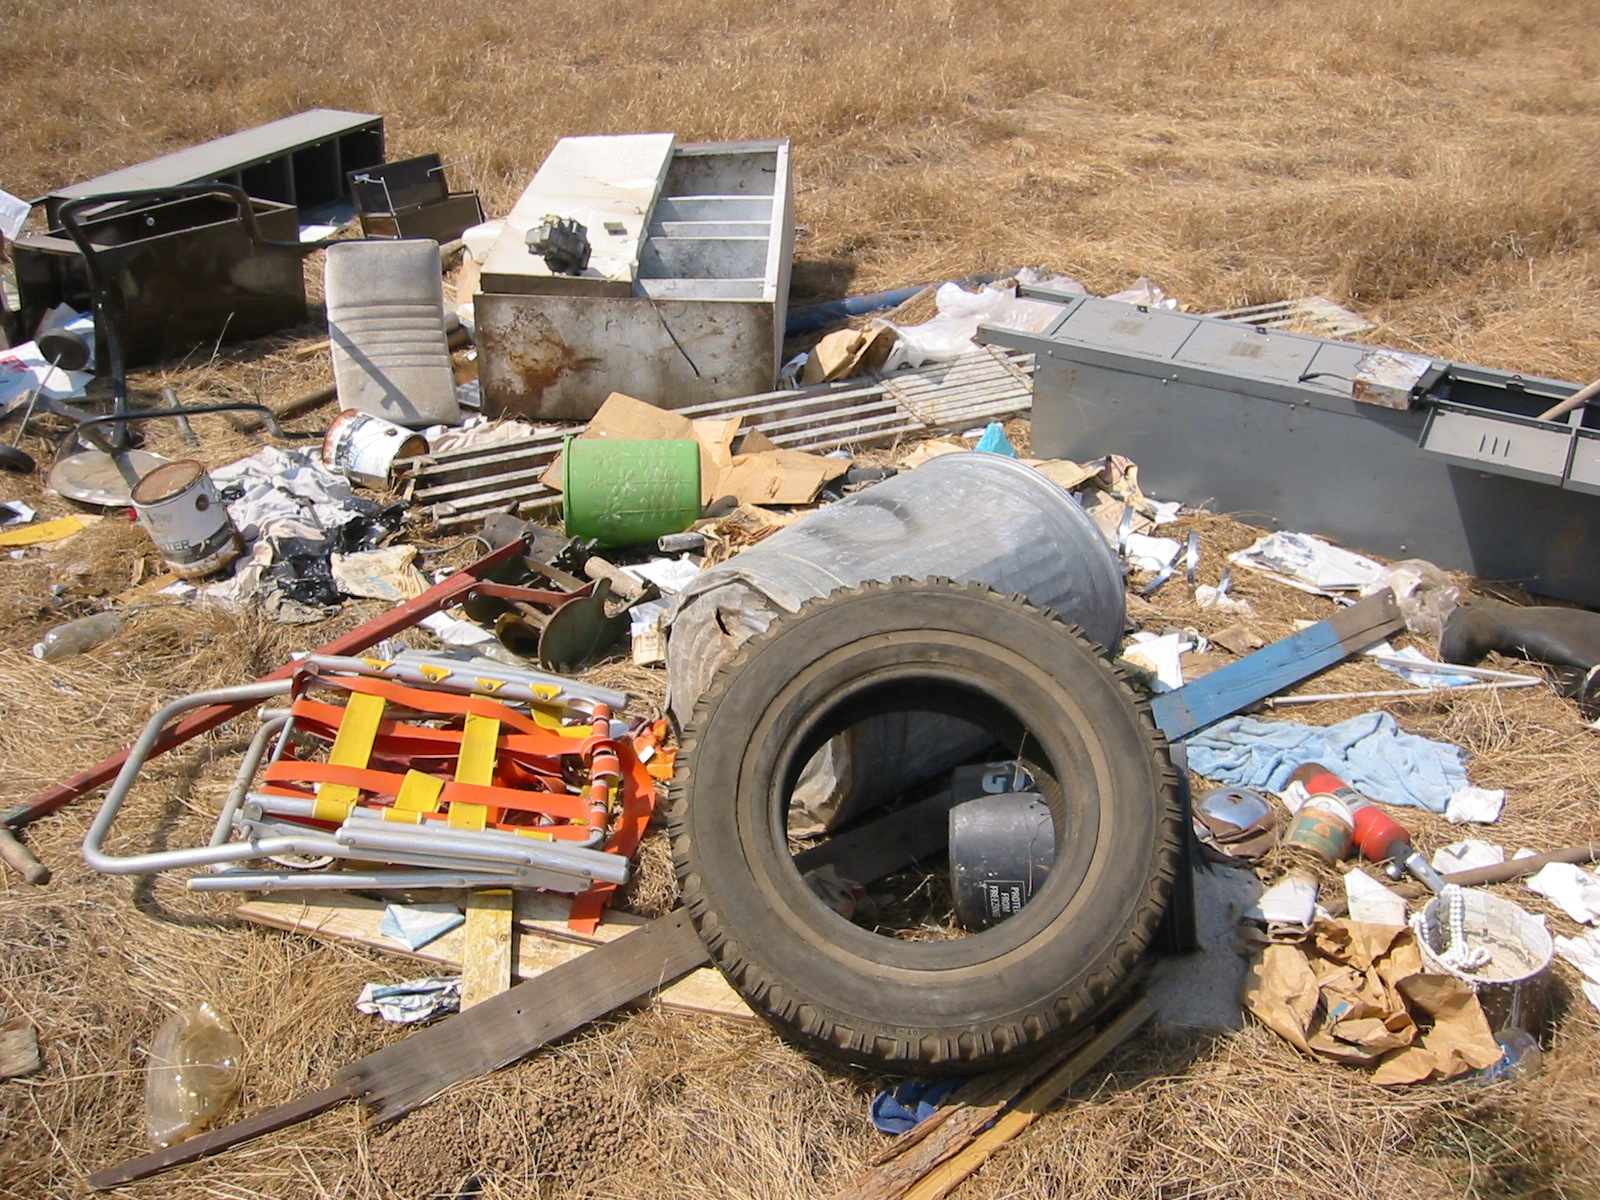 Examples of Junk, Garbage, and Rubbish: